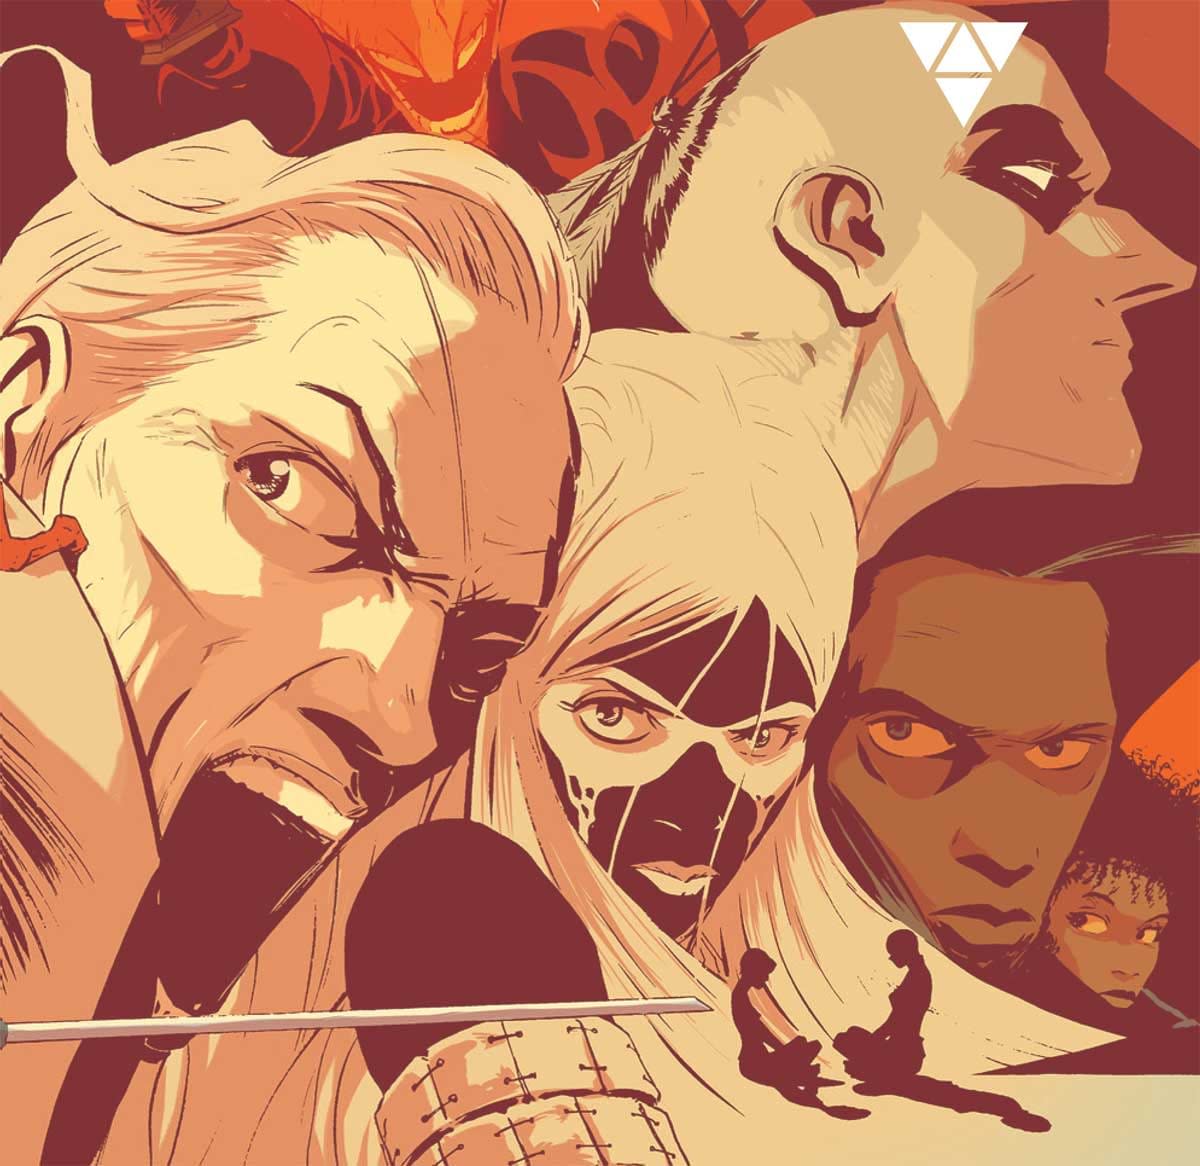 REVIEW: East Of West #45 